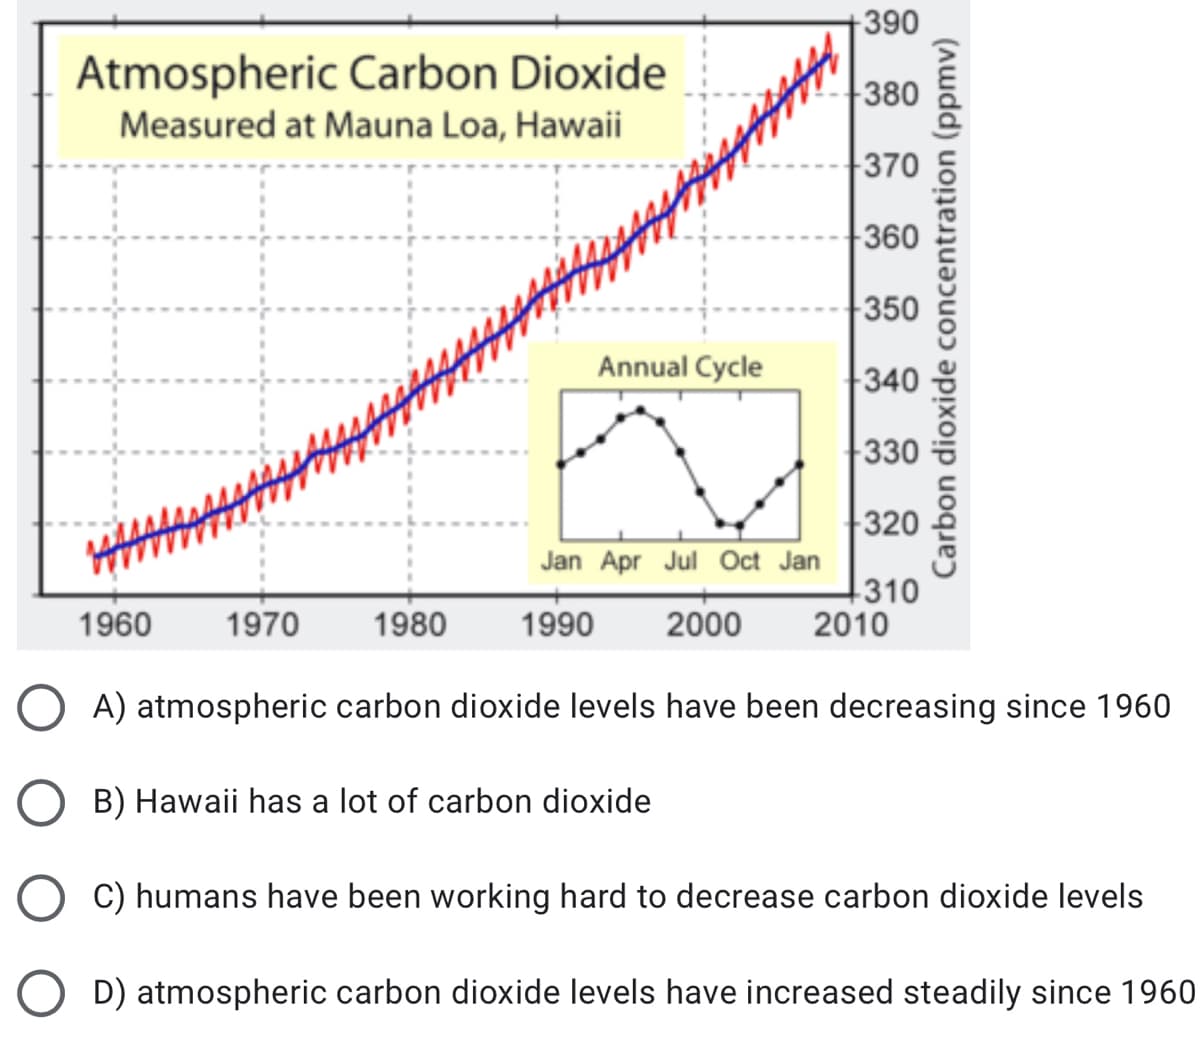 390
Atmospheric Carbon Dioxide
Measured at Mauna Loa, Hawaii
380
370
360
350
Annual Cycle
340
330
320
Jan Apr Jul Oct Jan
310
2010
1960
1970
1980
1990
2000
O A) atmospheric carbon dioxide levels have been decreasing since 1960
B) Hawaii has a lot of carbon dioxide
O C) humans have been working hard to decrease carbon dioxide levels
D) atmospheric carbon dioxide levels have increased steadily since 1960
Carbon dioxide concentration (ppmv)
